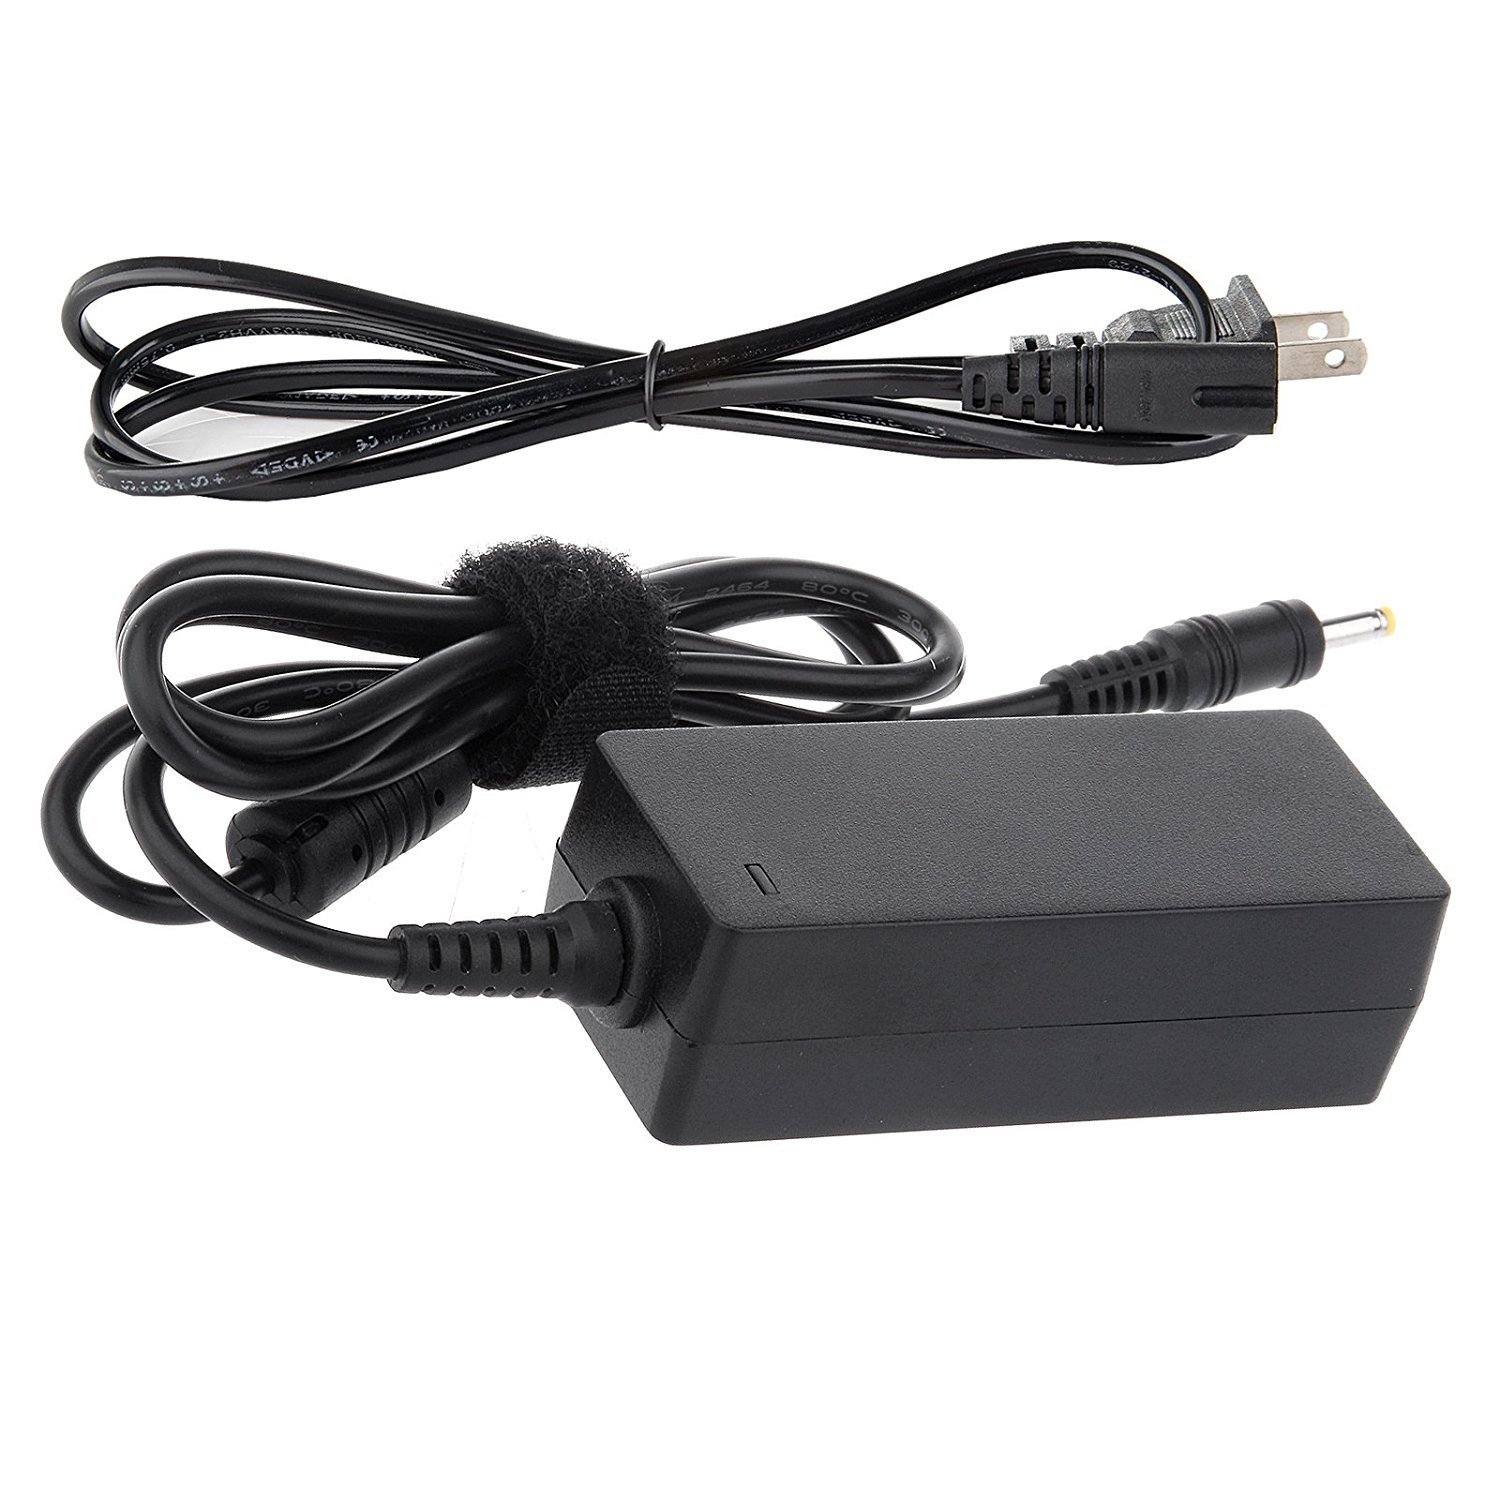 Fancy Buying Charger Adapter 19V 1.58A for HP Compaq Mini 100e 110 110-1000